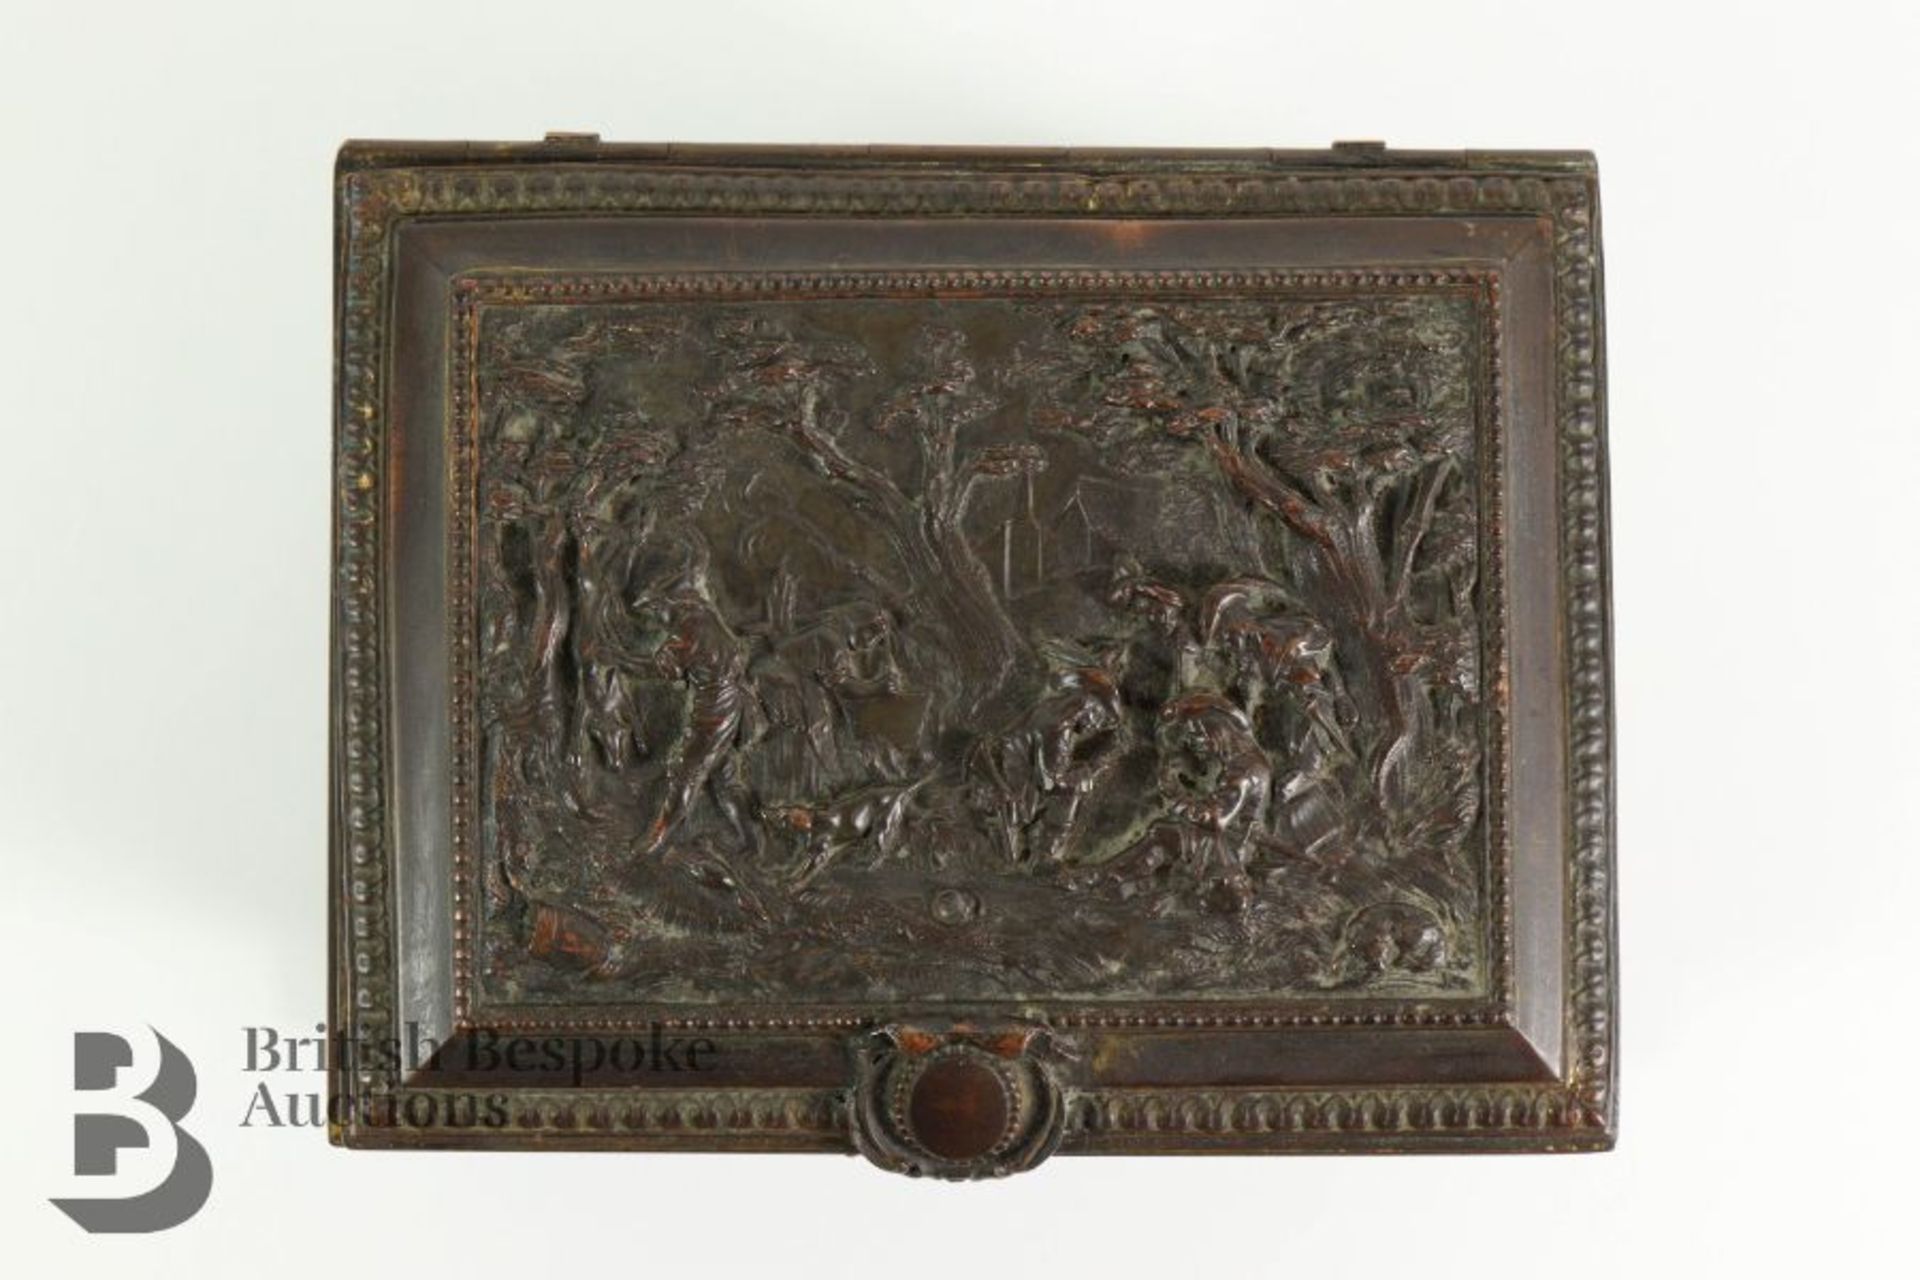 French Bronze Jewellery Casket - Image 4 of 6